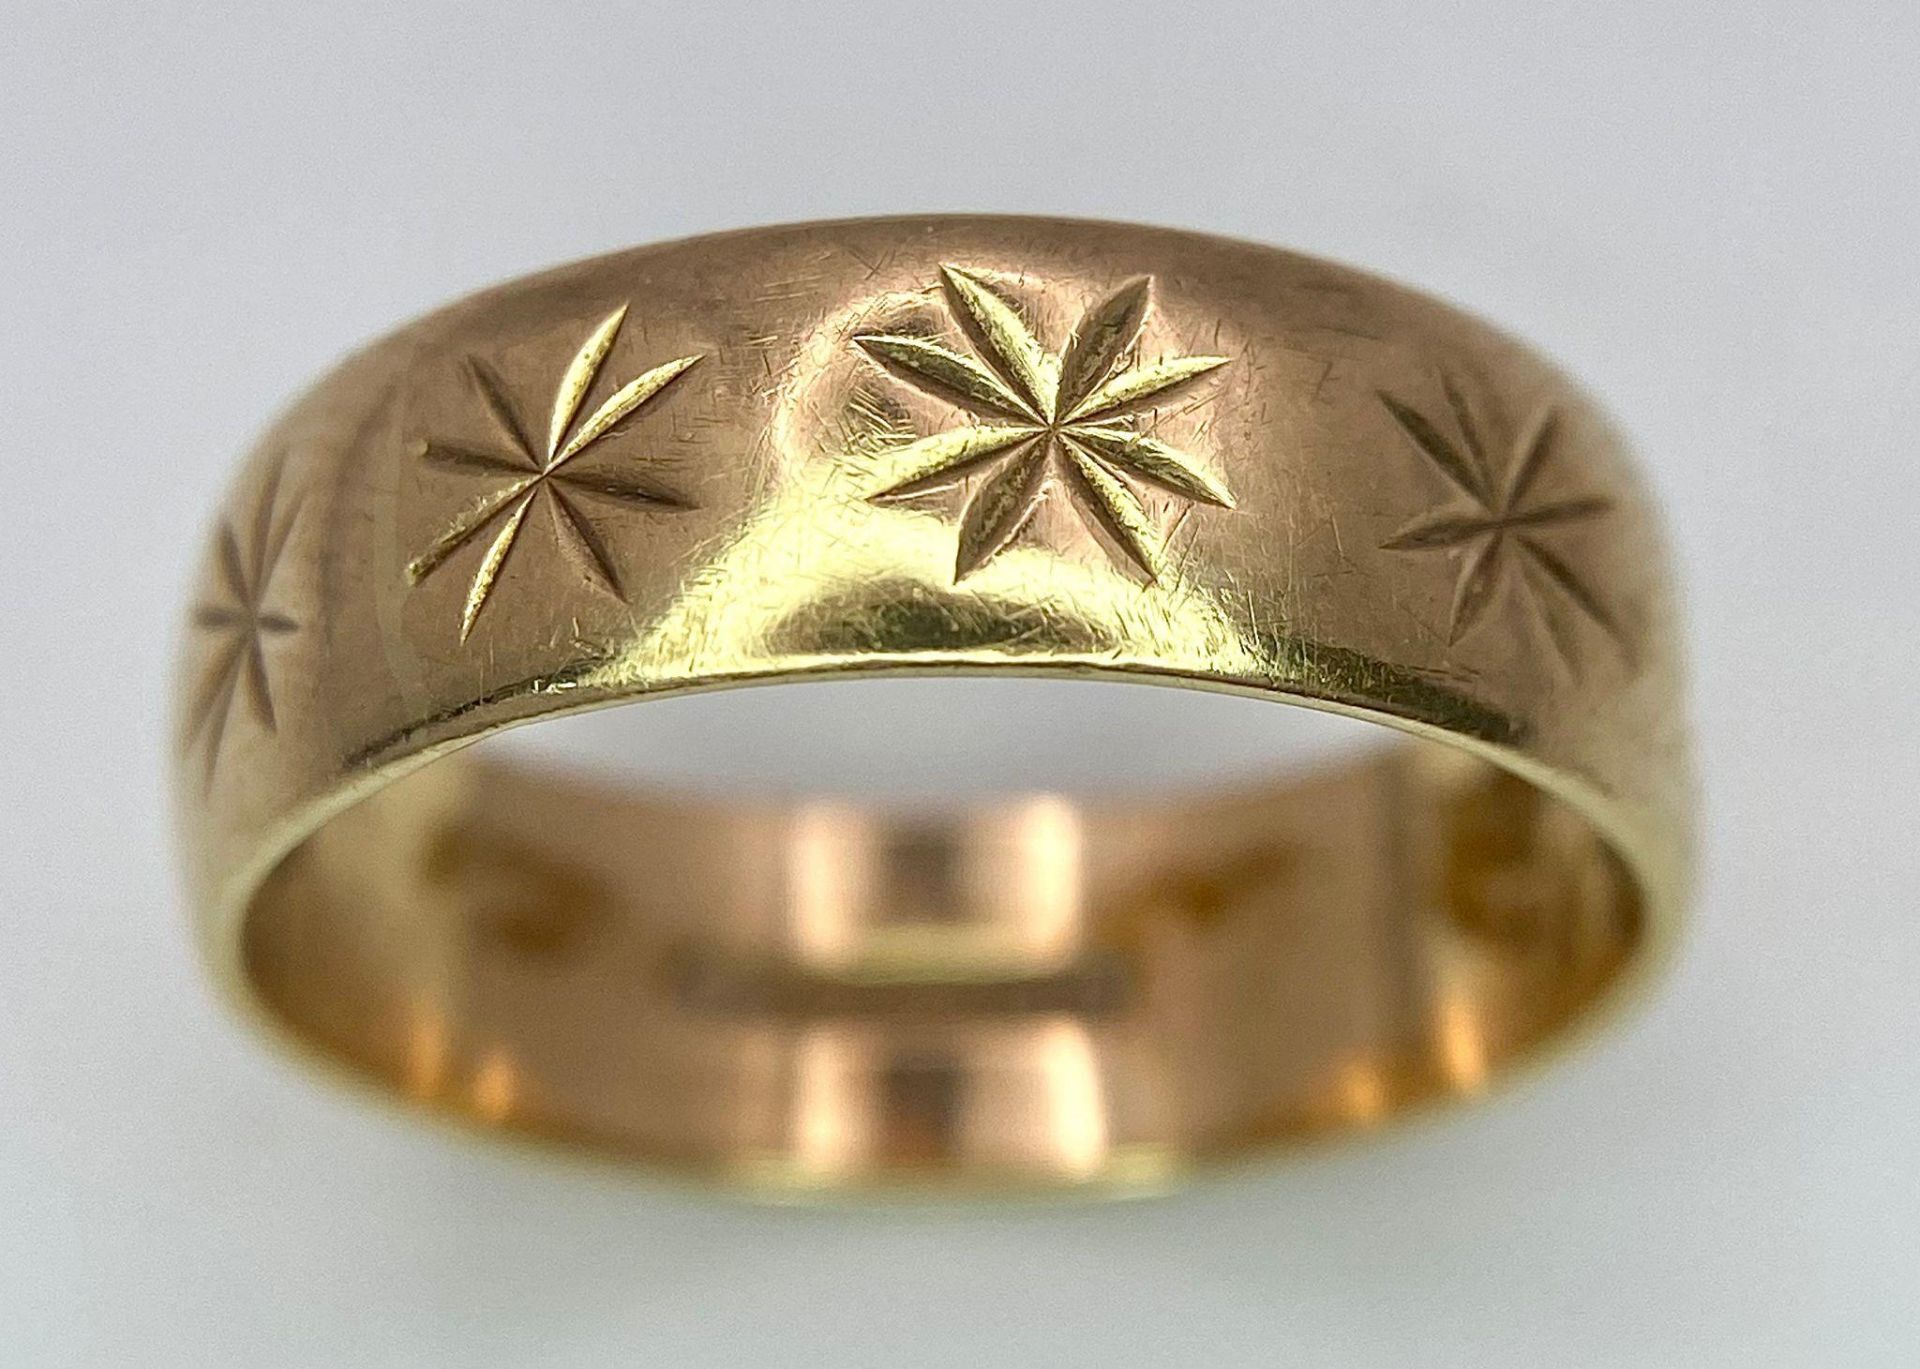 A Vintage 9K Yellow Gold Band Ring with Star Decoration. 5mm width. Size M. 2.8g weight. - Image 2 of 6